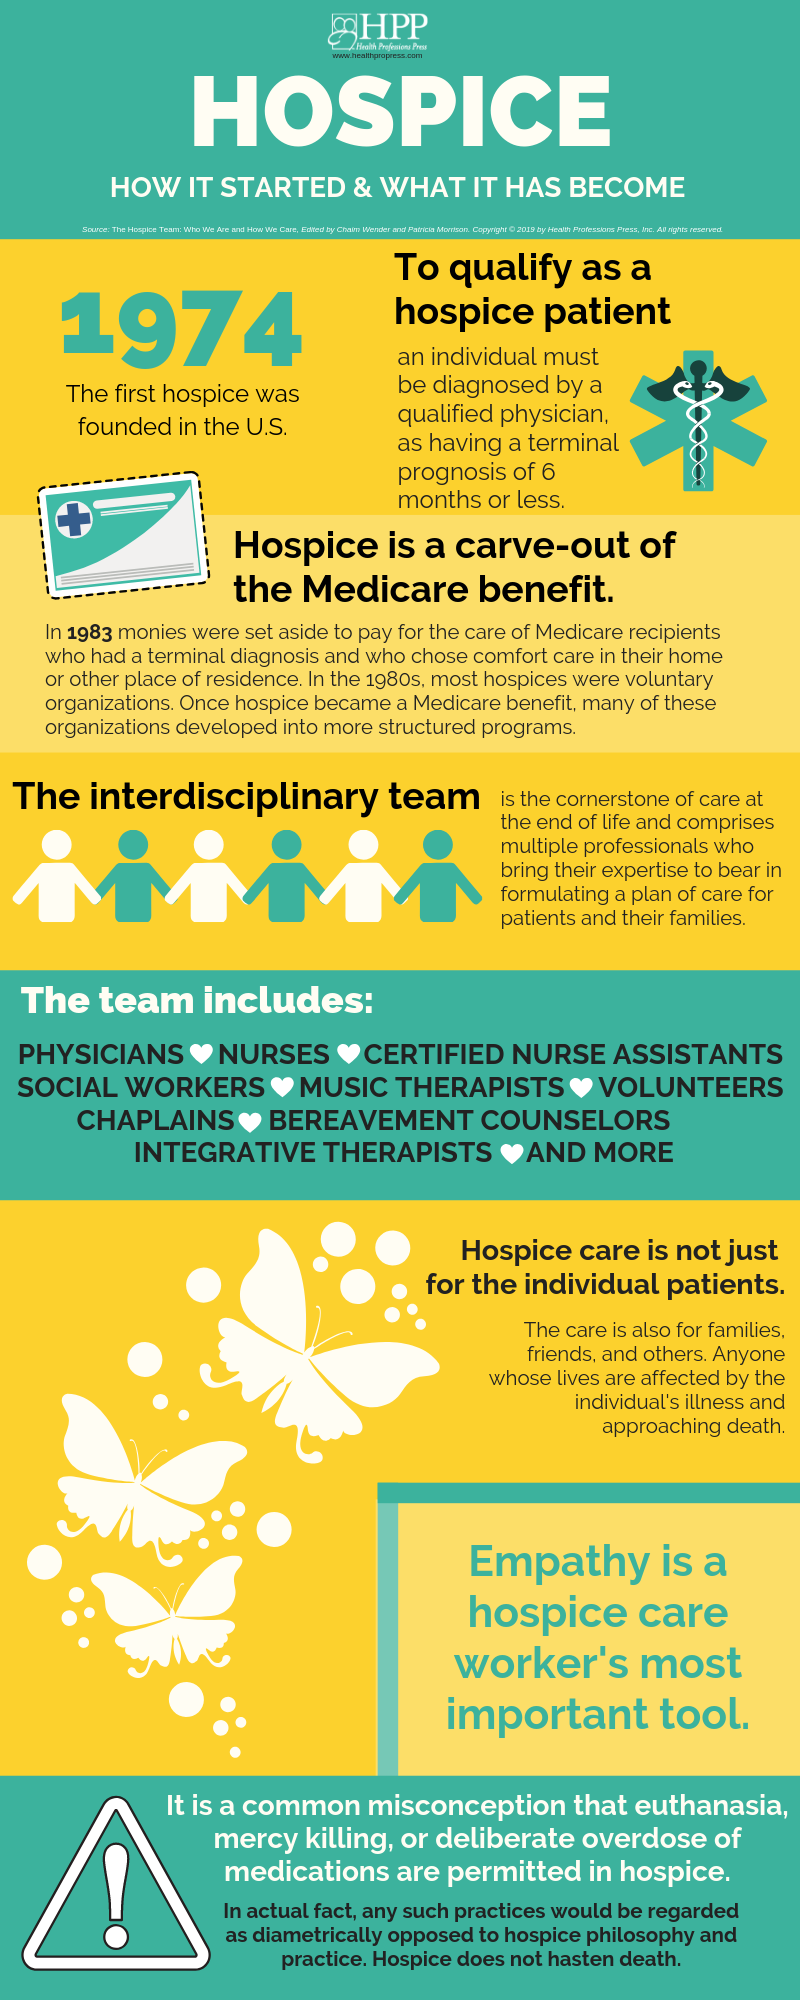 Hospice Overview infographic